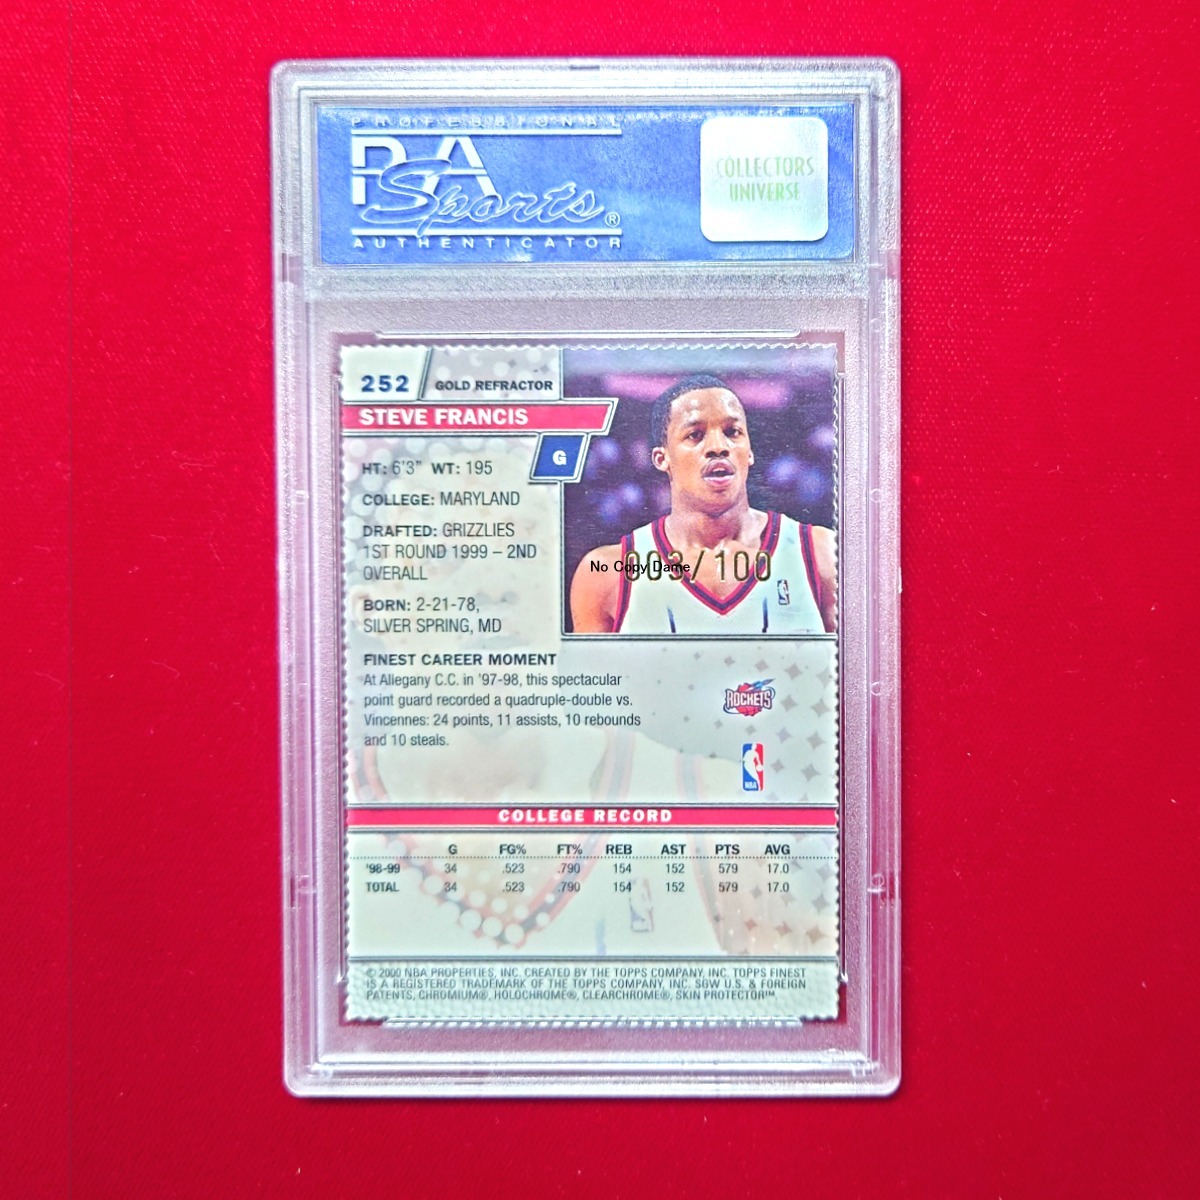 ◆Steve Francis Jersey#3【PSA9 RC】NBA 1999 Topps Finest ROOKIES Gold Refractor 3/100 W Coating card#252 ◇検索：ルーキーカード_画像2